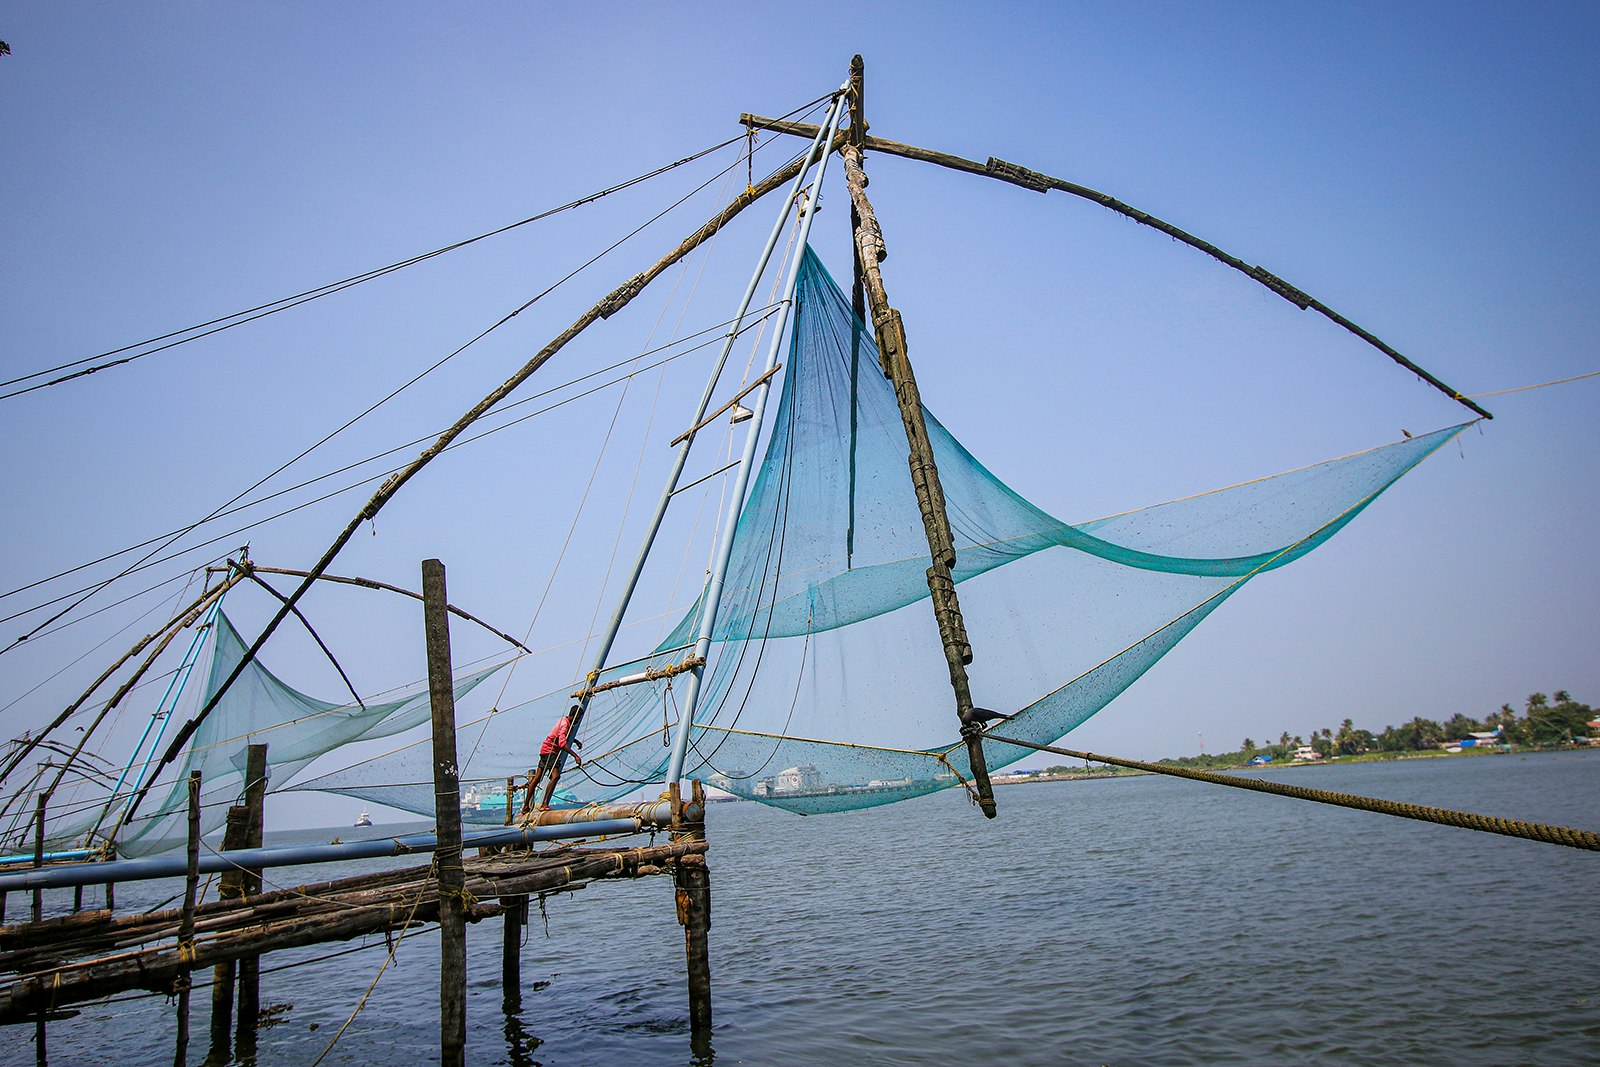 A fisherman in a red shirt operates the large, levered fishing nets of Kochi, India.